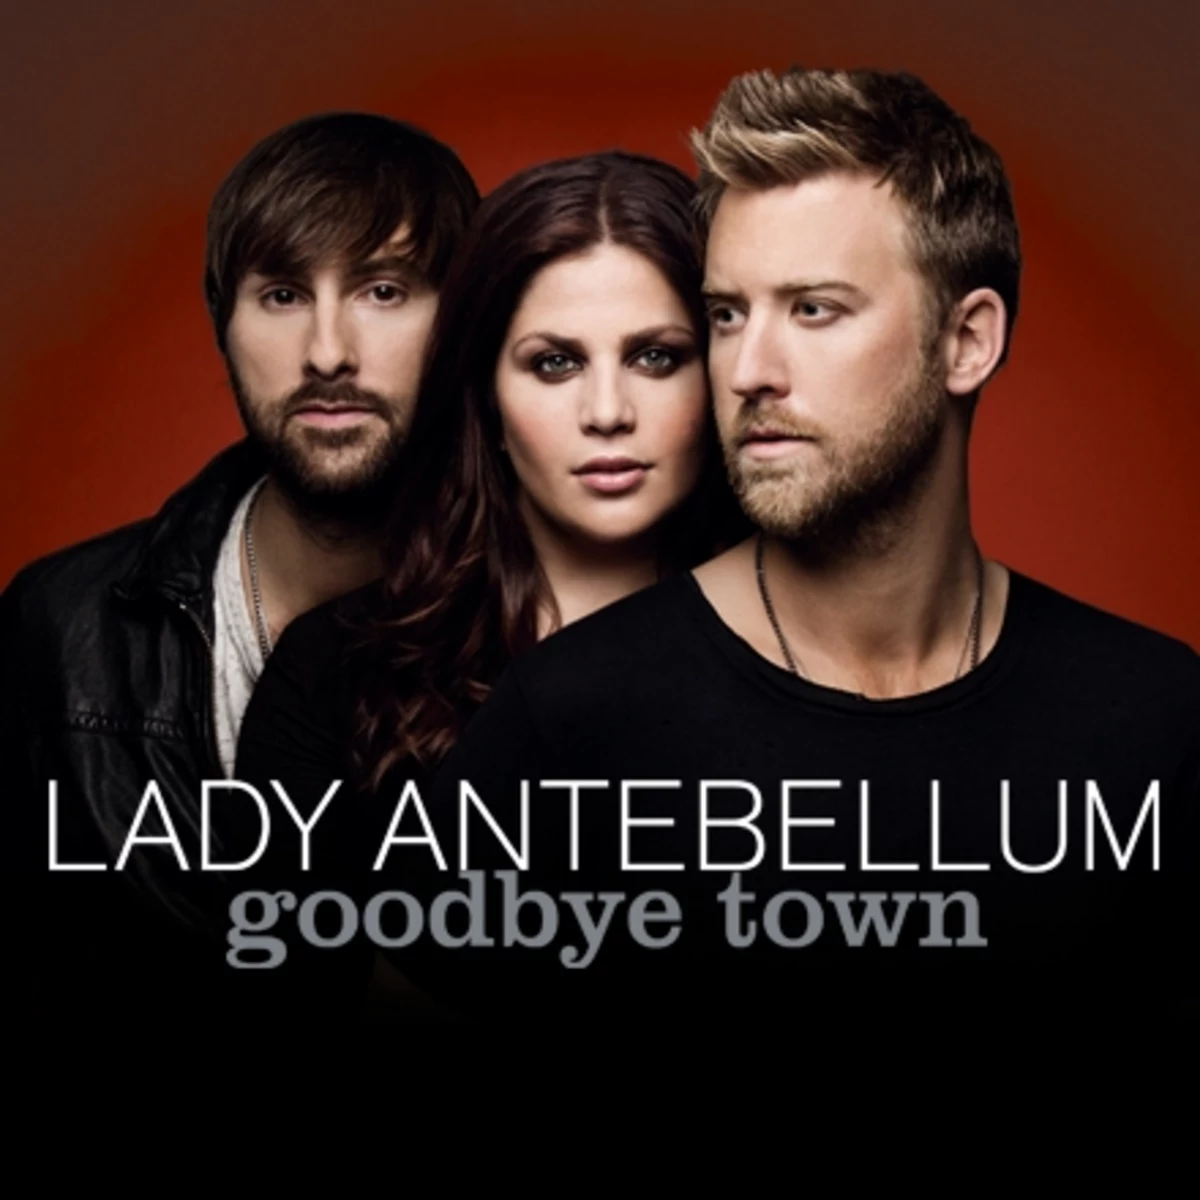 Lady Antebellum Releases New Song “Goodbye Town” [AUDIO]